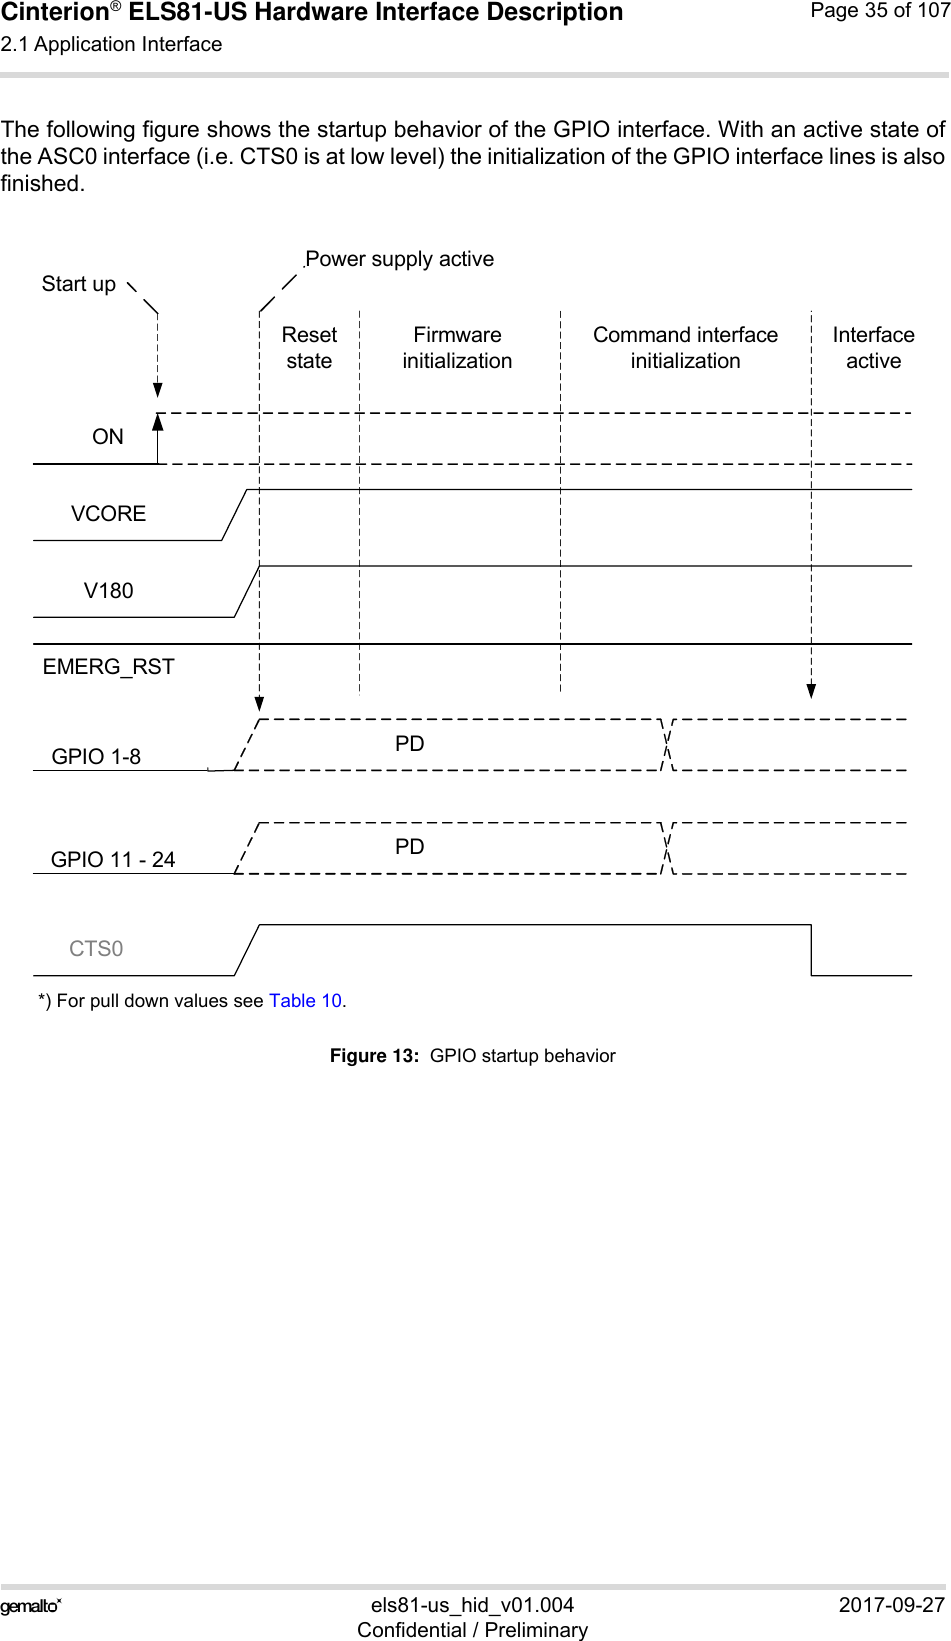 Cinterion® ELS81-US Hardware Interface Description2.1 Application Interface53els81-us_hid_v01.004 2017-09-27Confidential / PreliminaryPage 35 of 107The following figure shows the startup behavior of the GPIO interface. With an active state ofthe ASC0 interface (i.e. CTS0 is at low level) the initialization of the GPIO interface lines is alsofinished.*) For pull down values see Table 10.Figure 13:  GPIO startup behaviorGPIO 1-8 PDCTS0ONEMERG_RSTPower supply activeStart upFirmware initializationCommand interface initializationInterface activeResetstateV180VCOREGPIO 11 - 24 PD